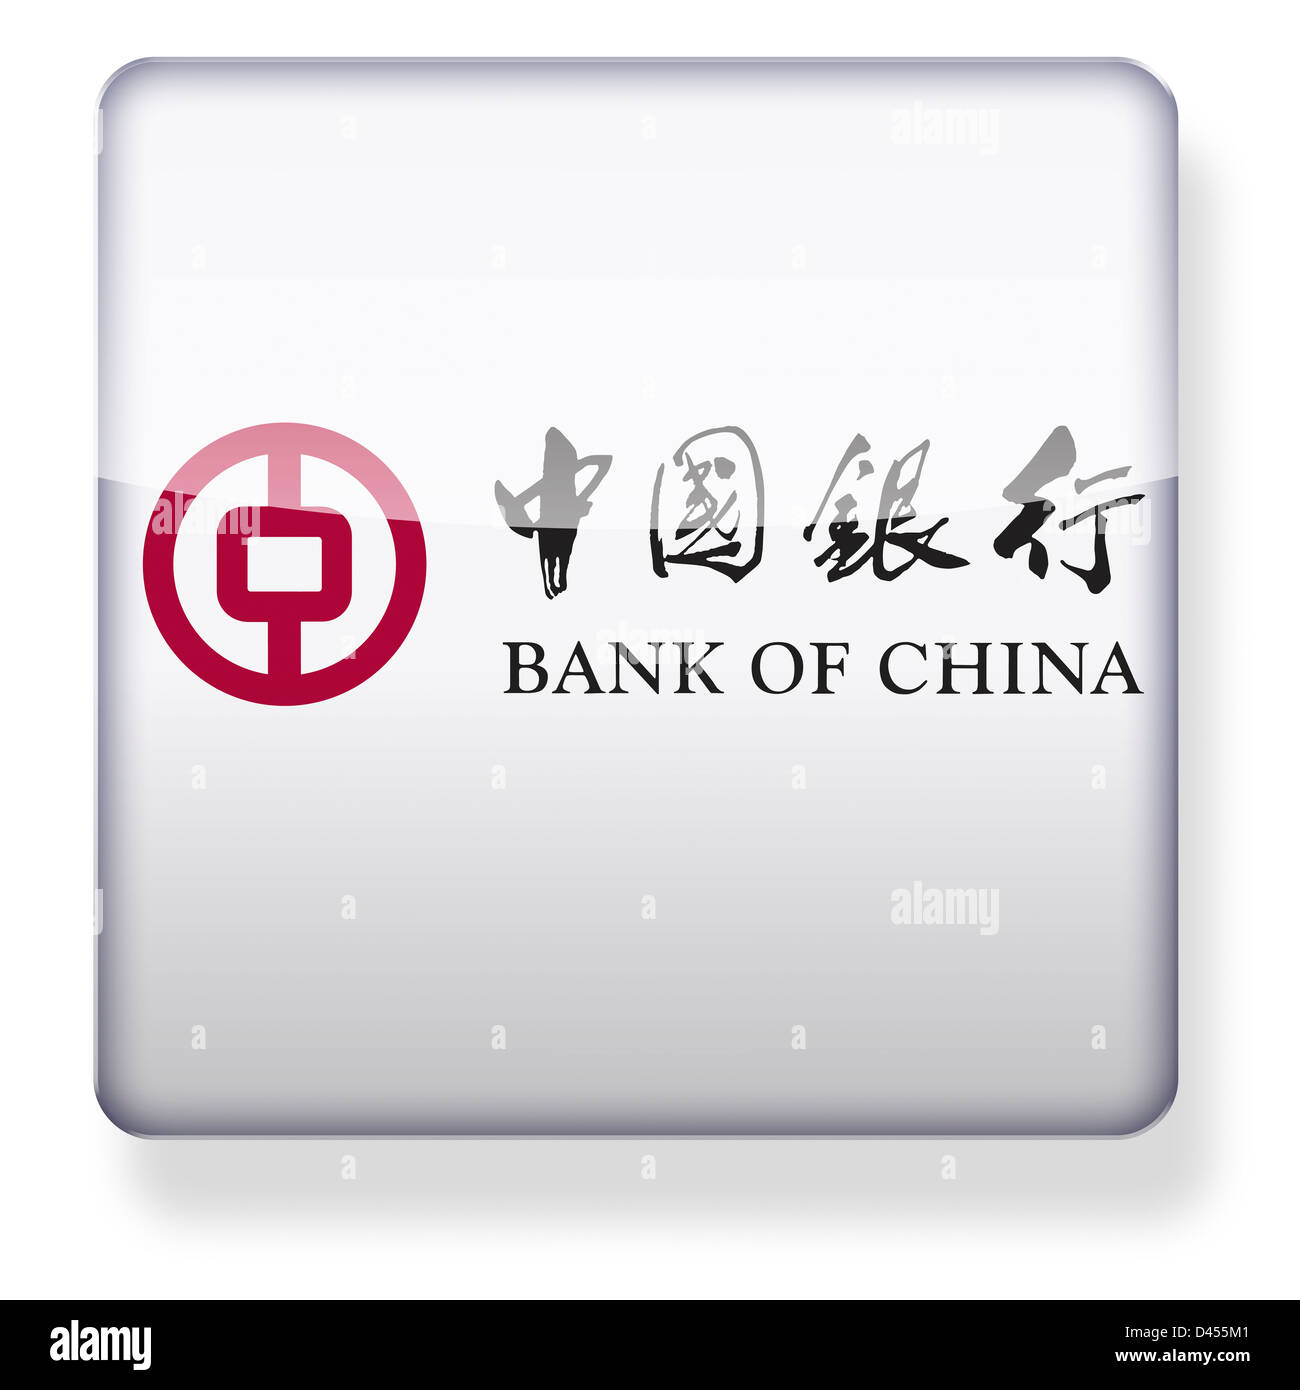 Bank of China logo as an app icon. Clipping path included. Stock Photo